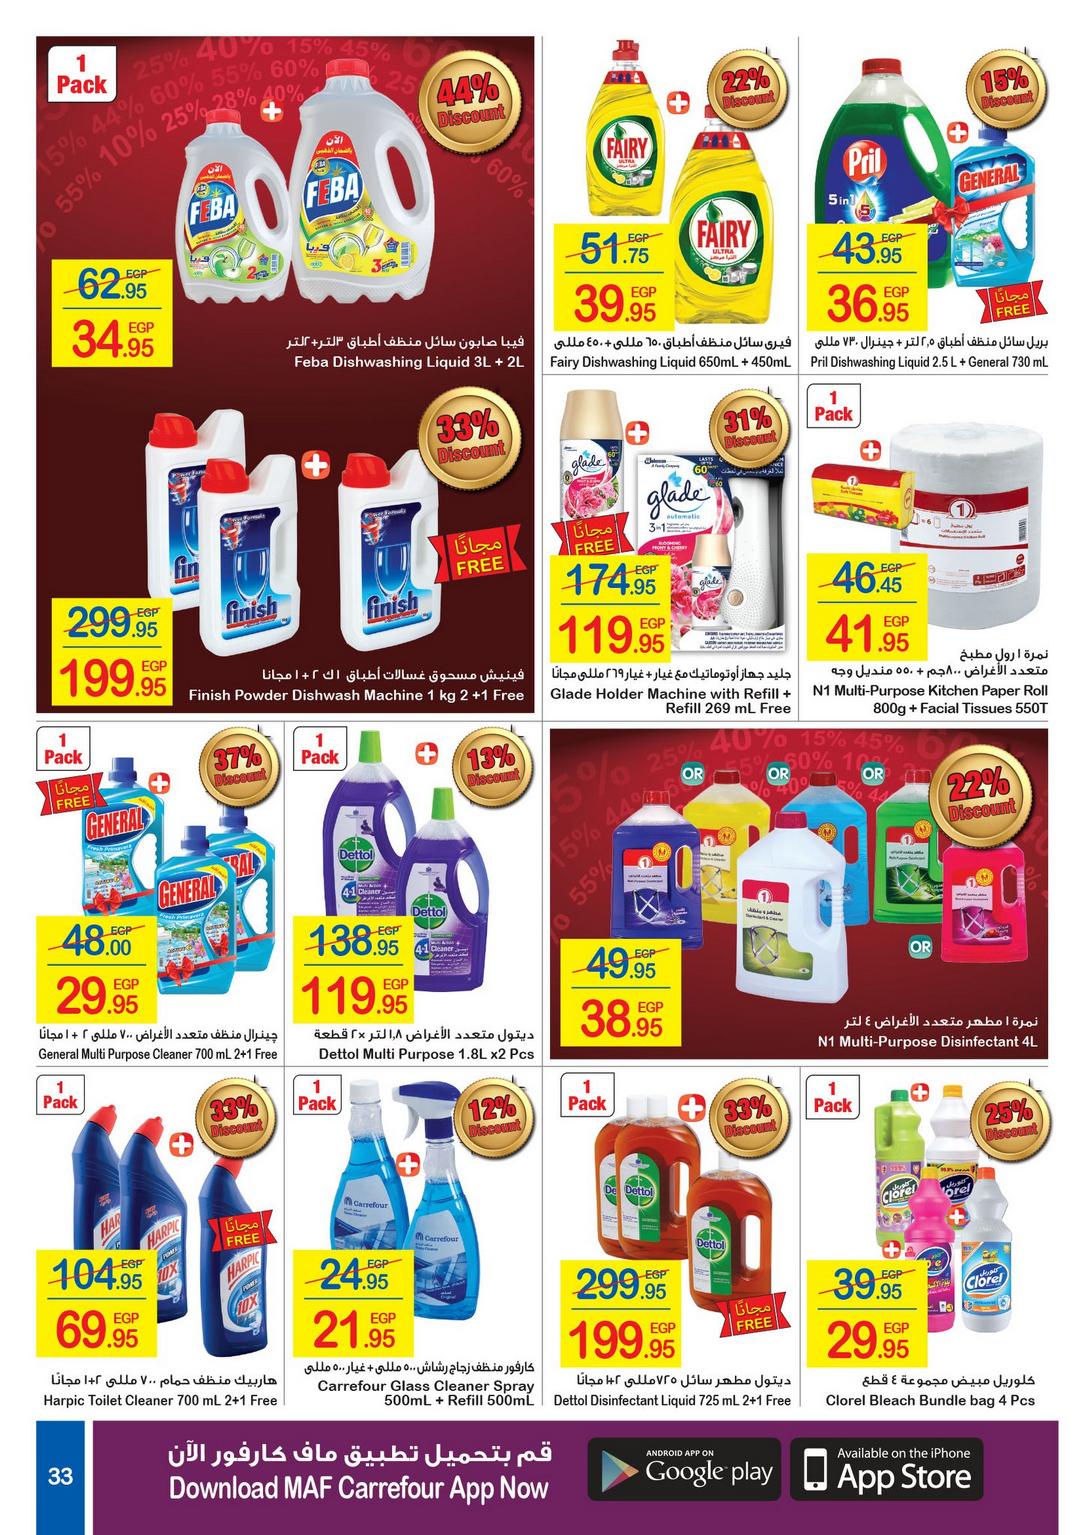 Carrefour Deals from 1/1 till 14/1 | Carrefour Egypt 34